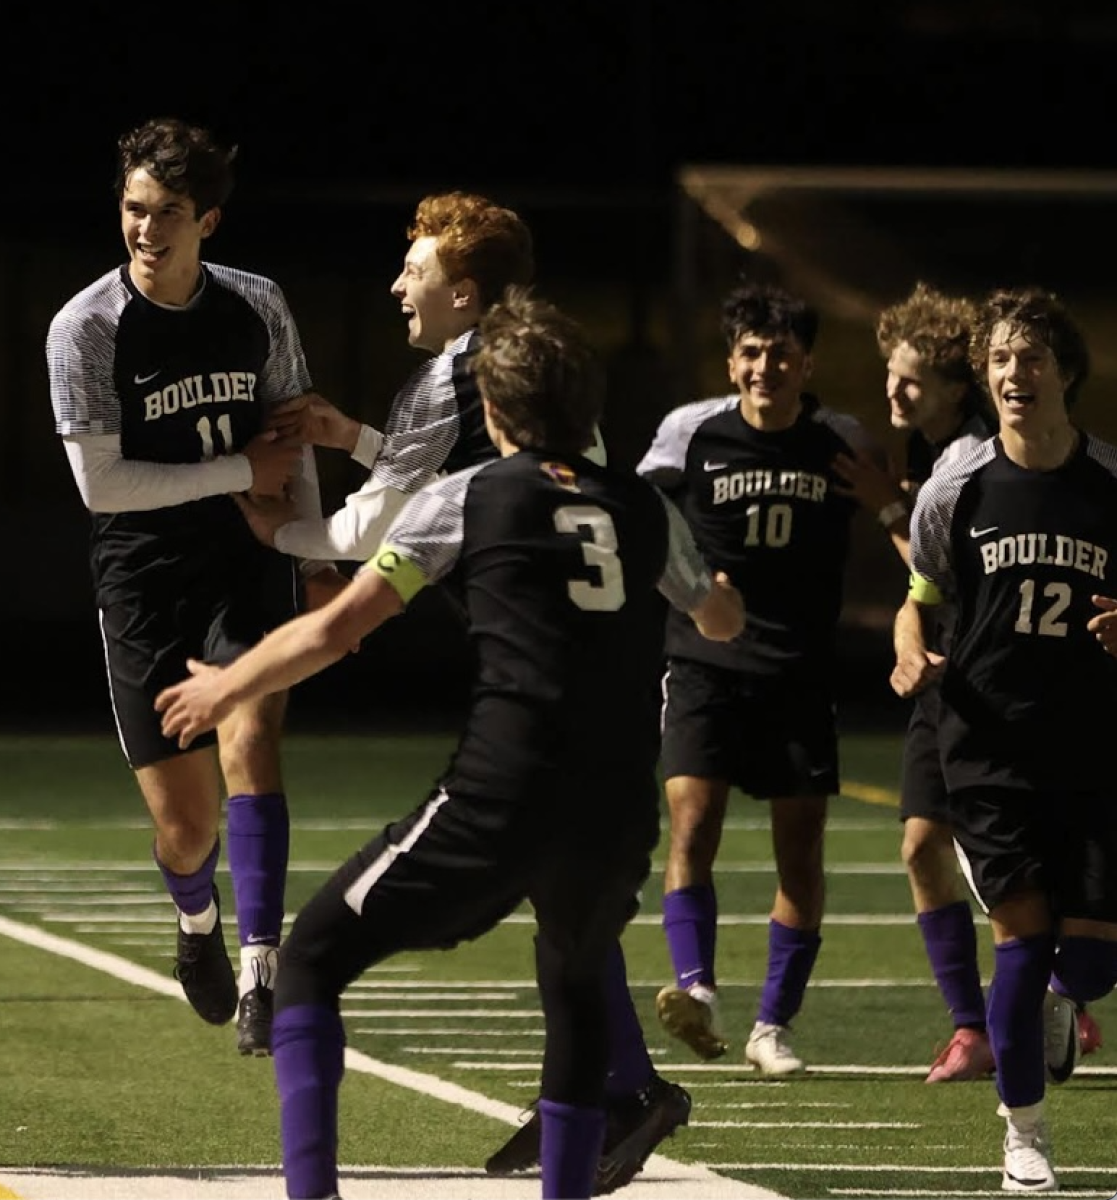 Boys Soccer celebrating one of their 4 goals joyfully in their October 25th playoff game vs Grandview.